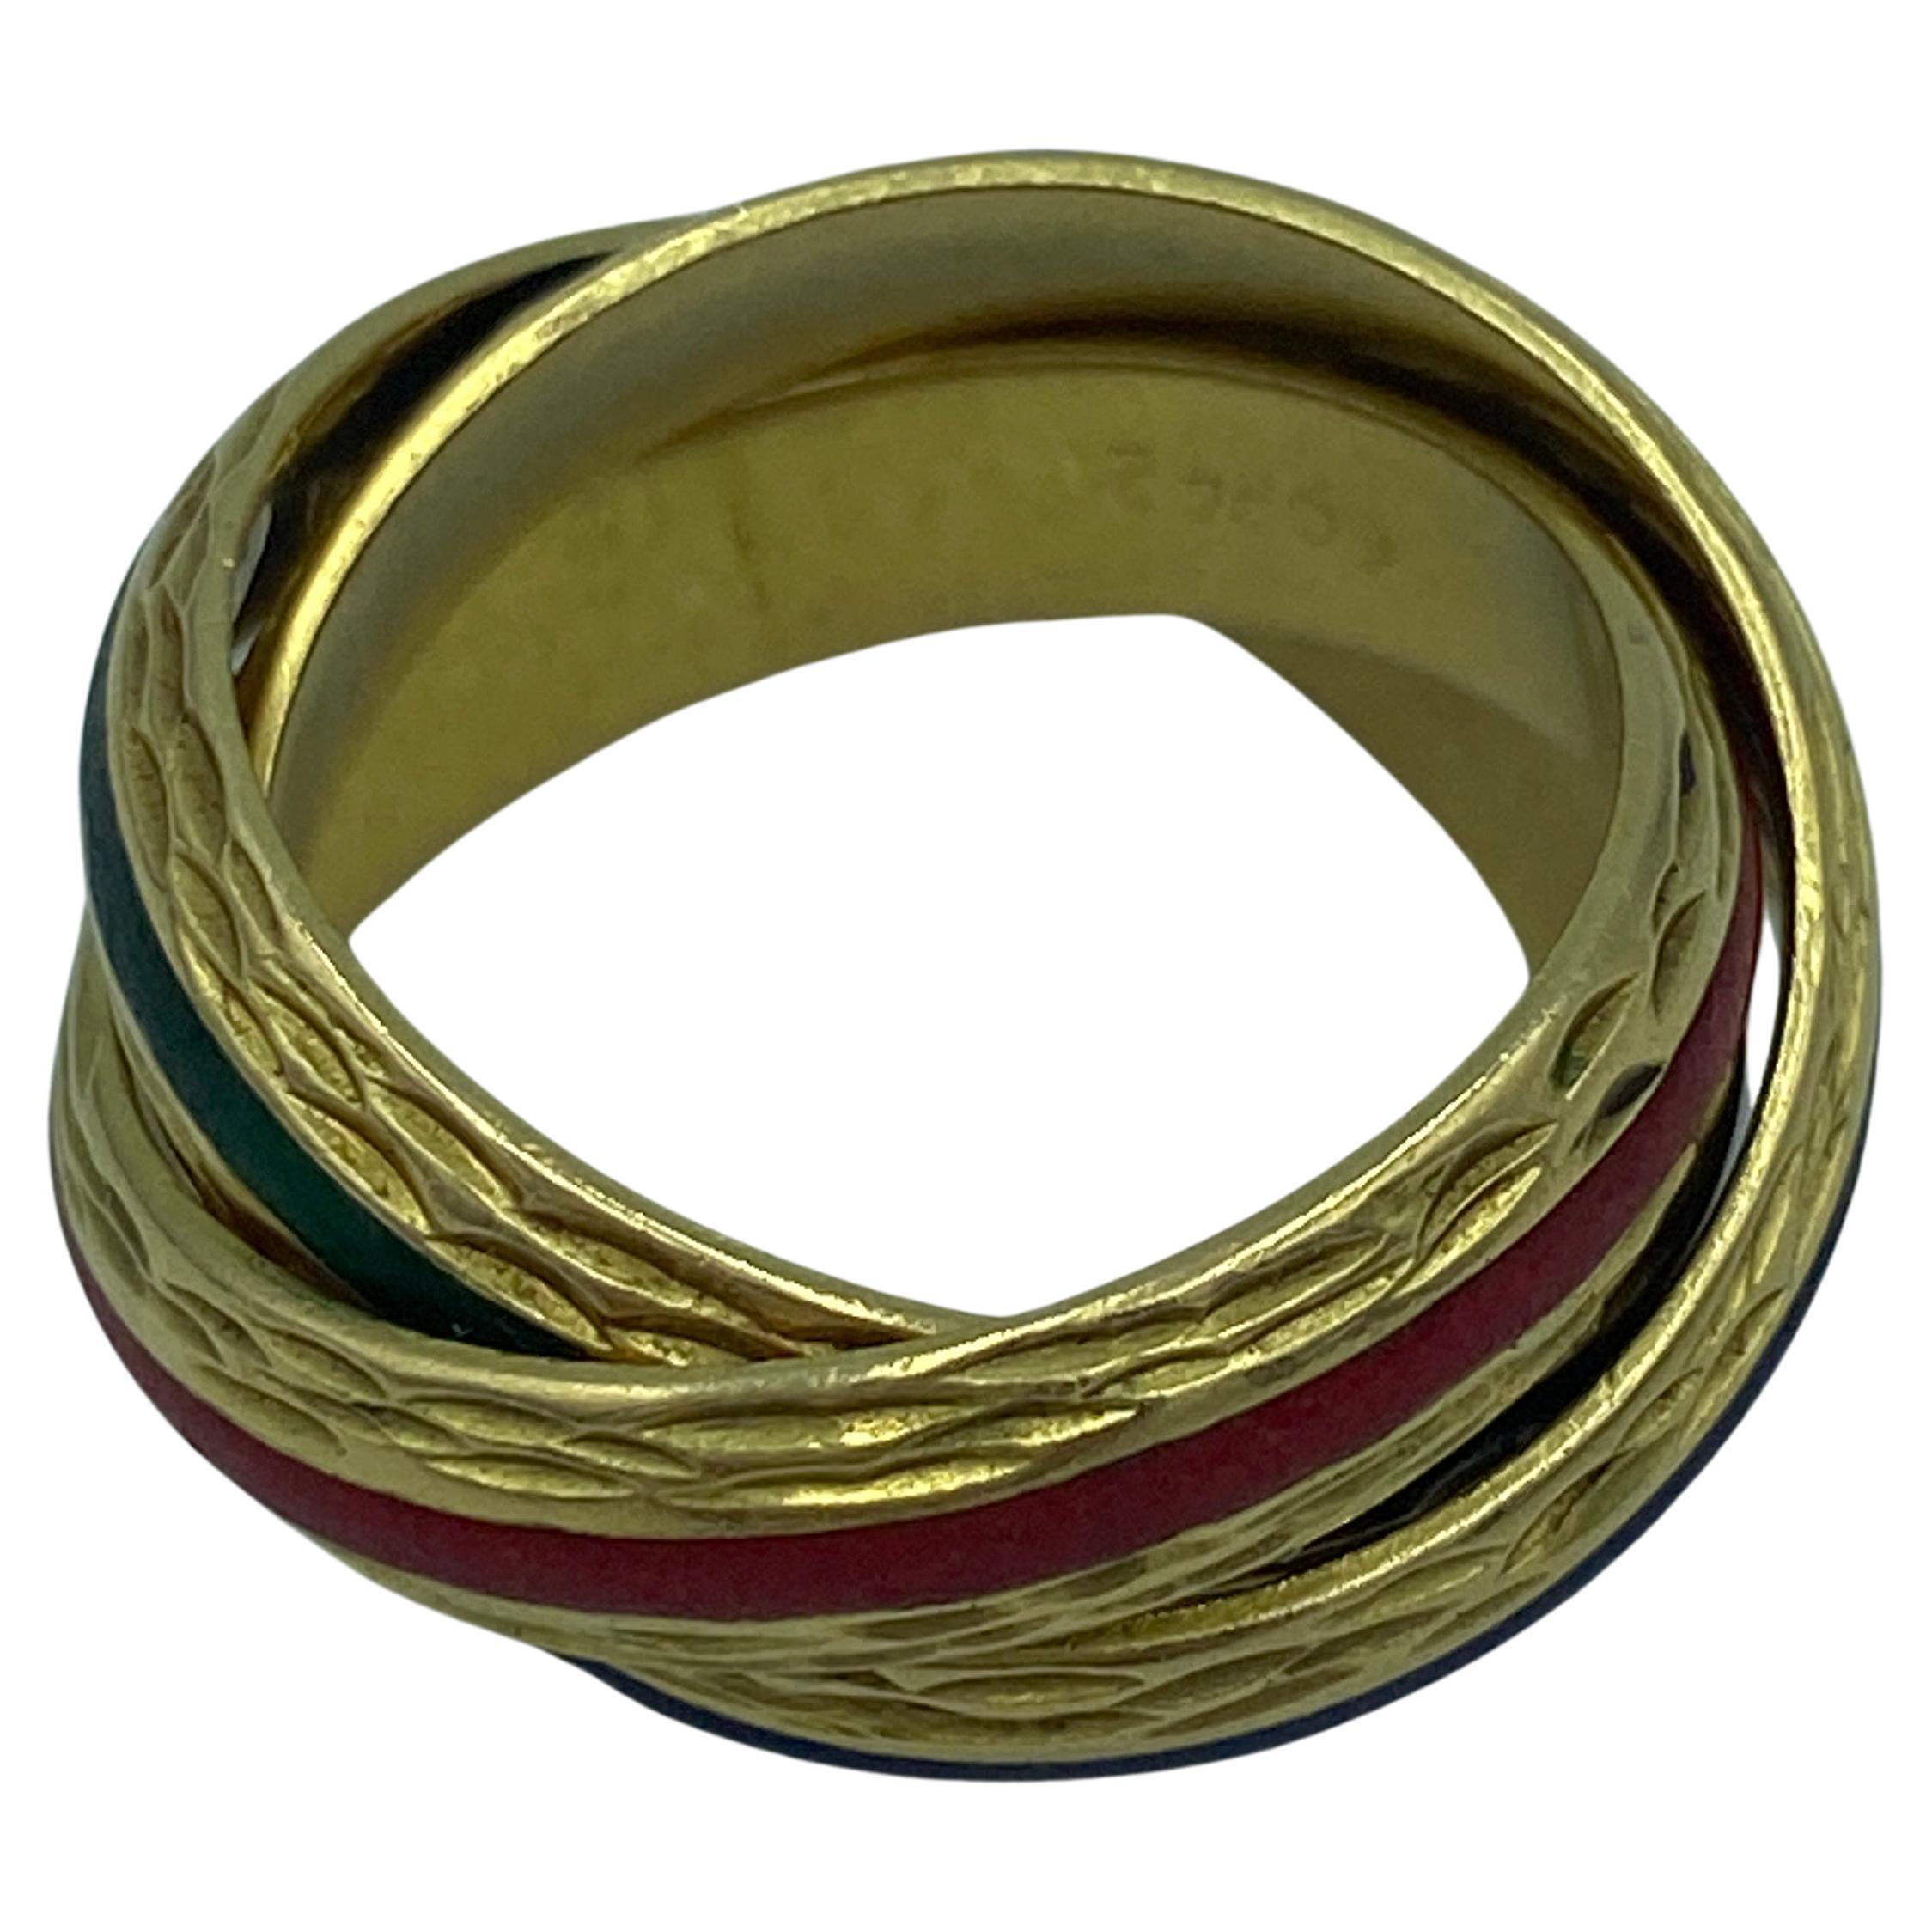 Hermes 1980s 18 carat gold and enamel trinity ring